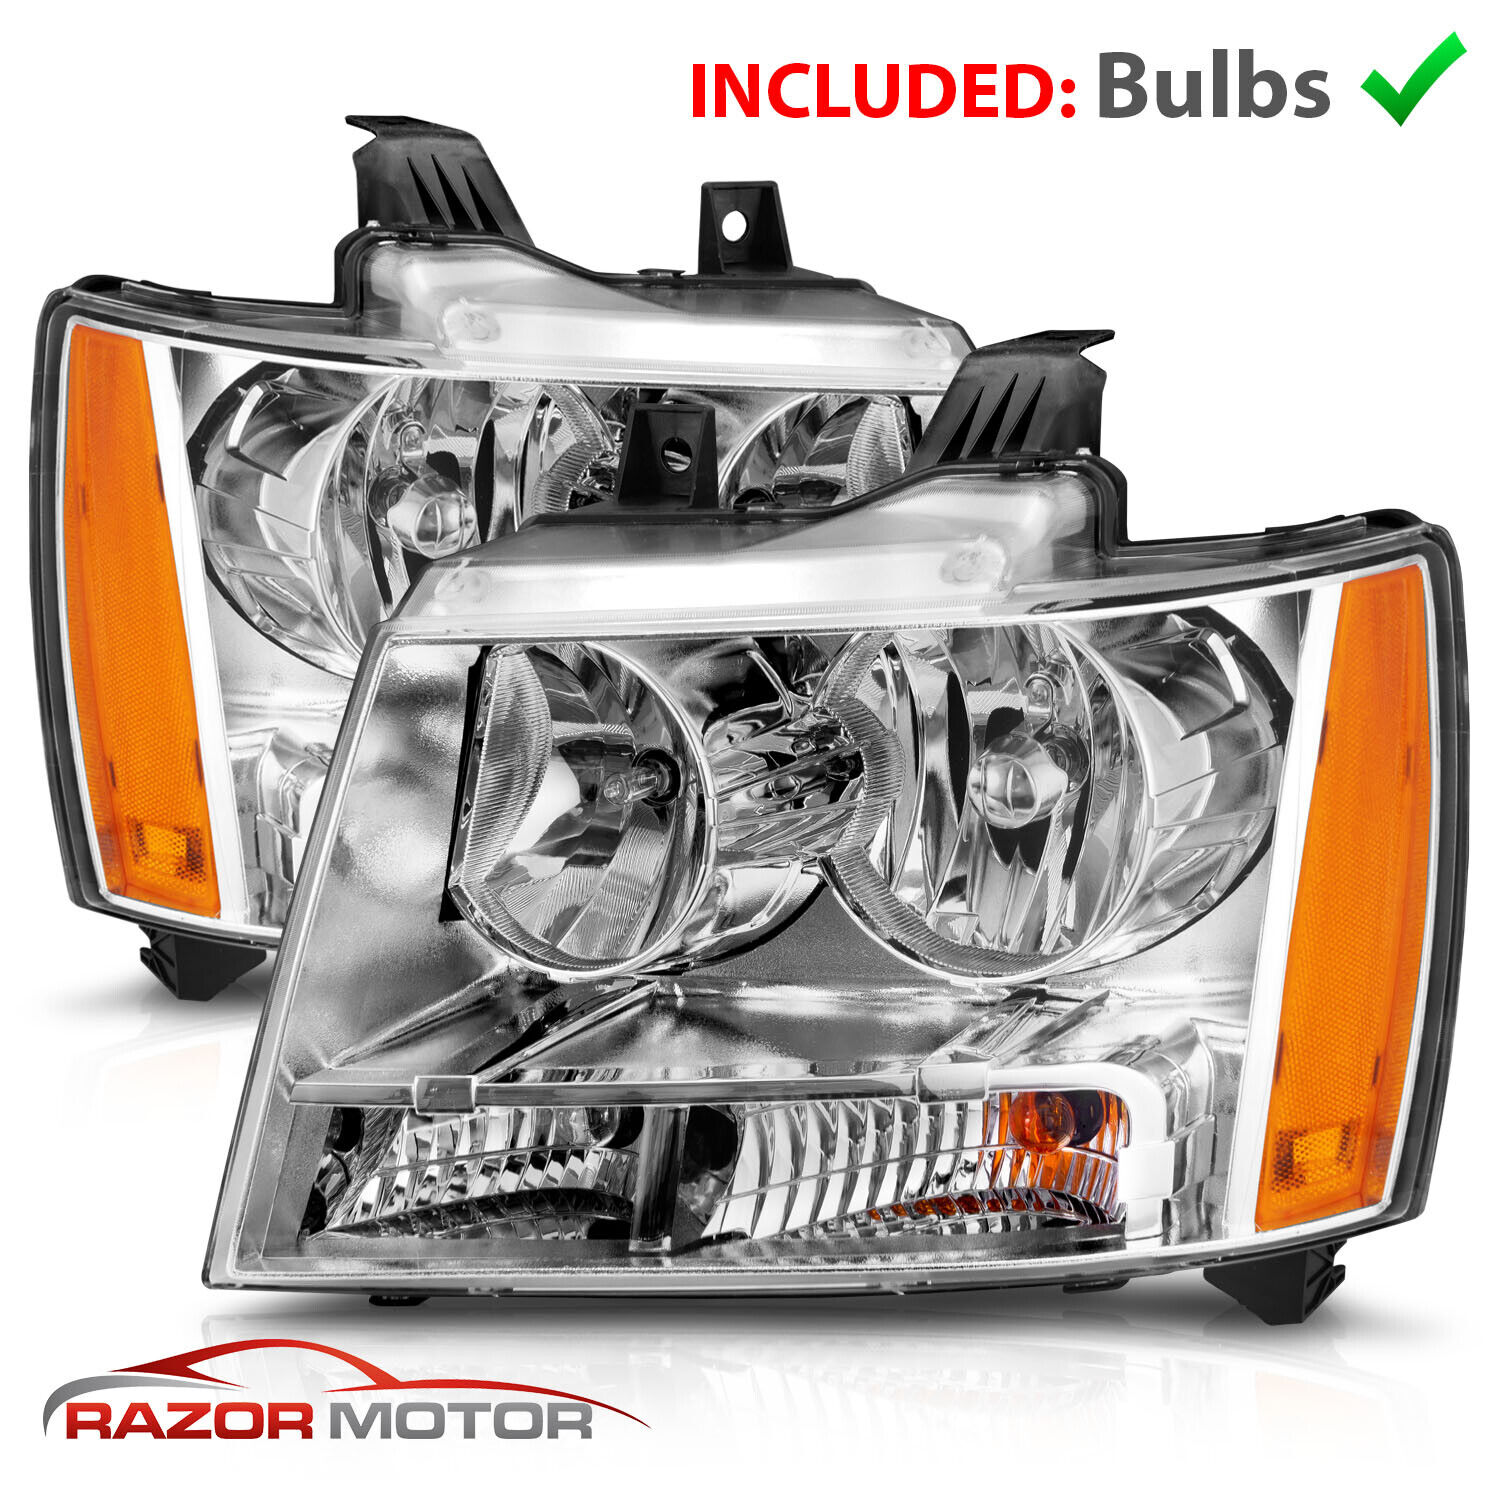 2007-14 Replacement Chrome Headlight Pair for Chevy Avalanche Subarban Tahoe